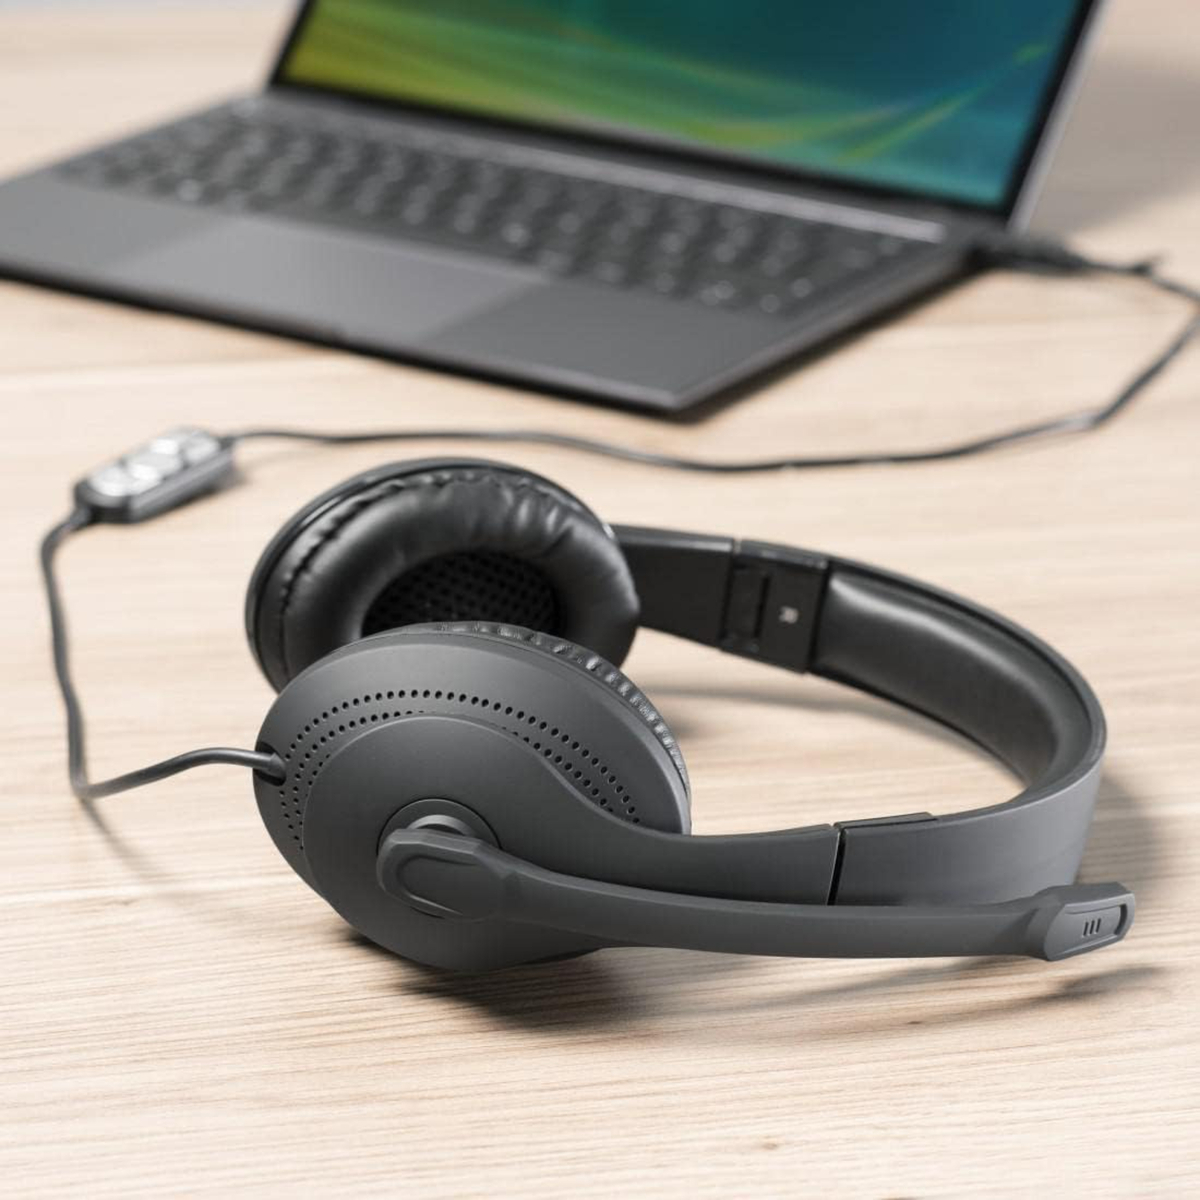 Hama Office PC Stereo Headset, Black, HS-USB300 Online at Best Price | PC  Headset | Lulu Oman | PC-Headsets